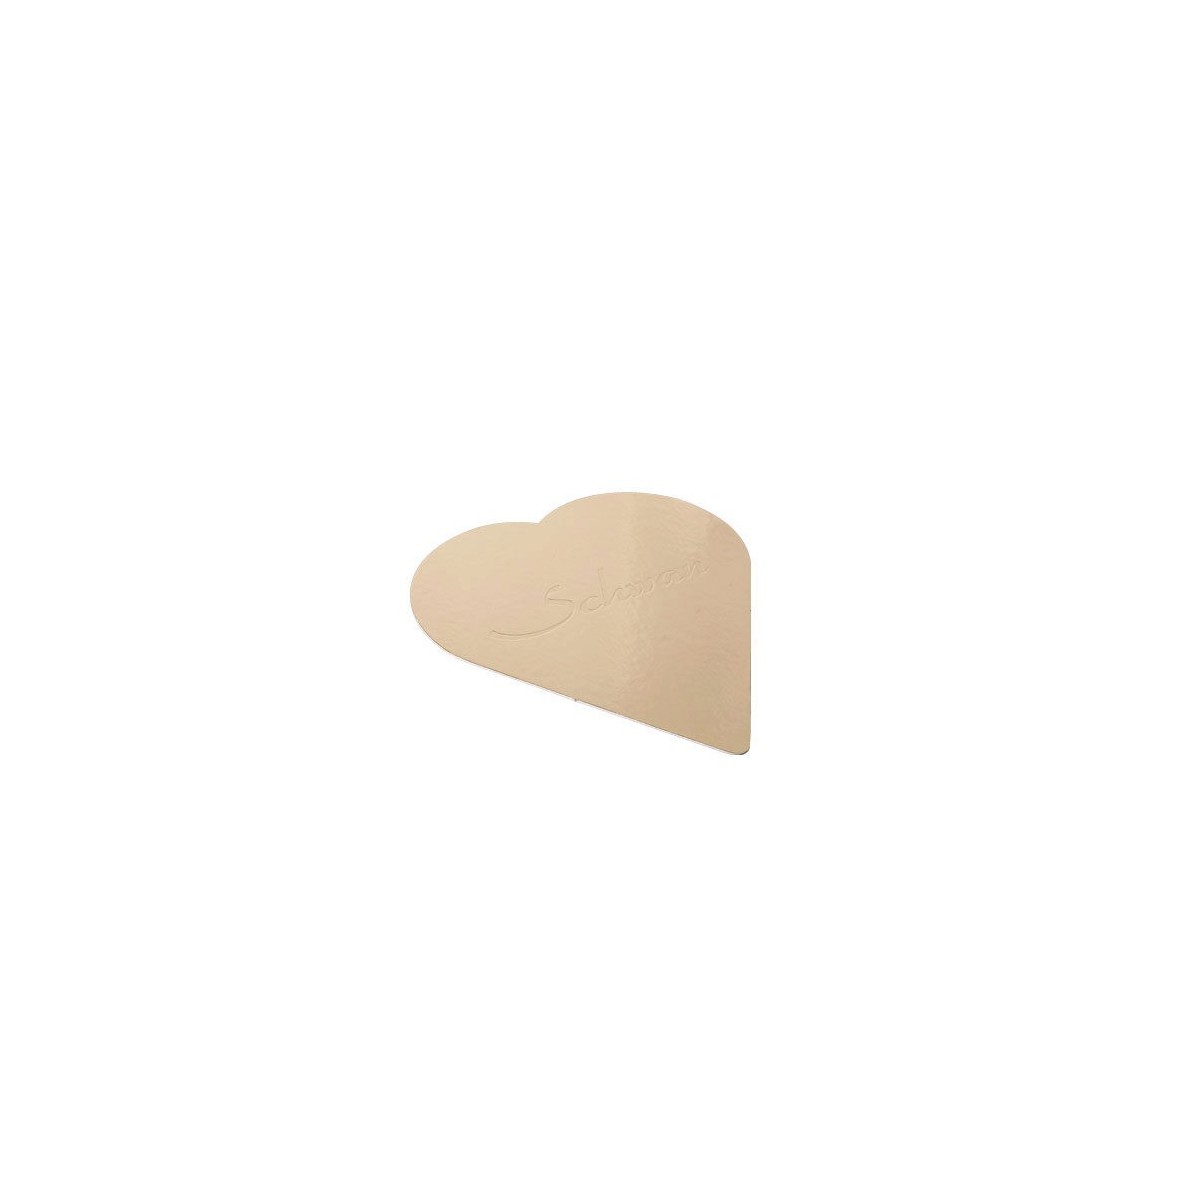 CAKE BOARD HEART GOLD 9 CM 250 PIECES FOSTPLUS INCLUDED  PACKAGE